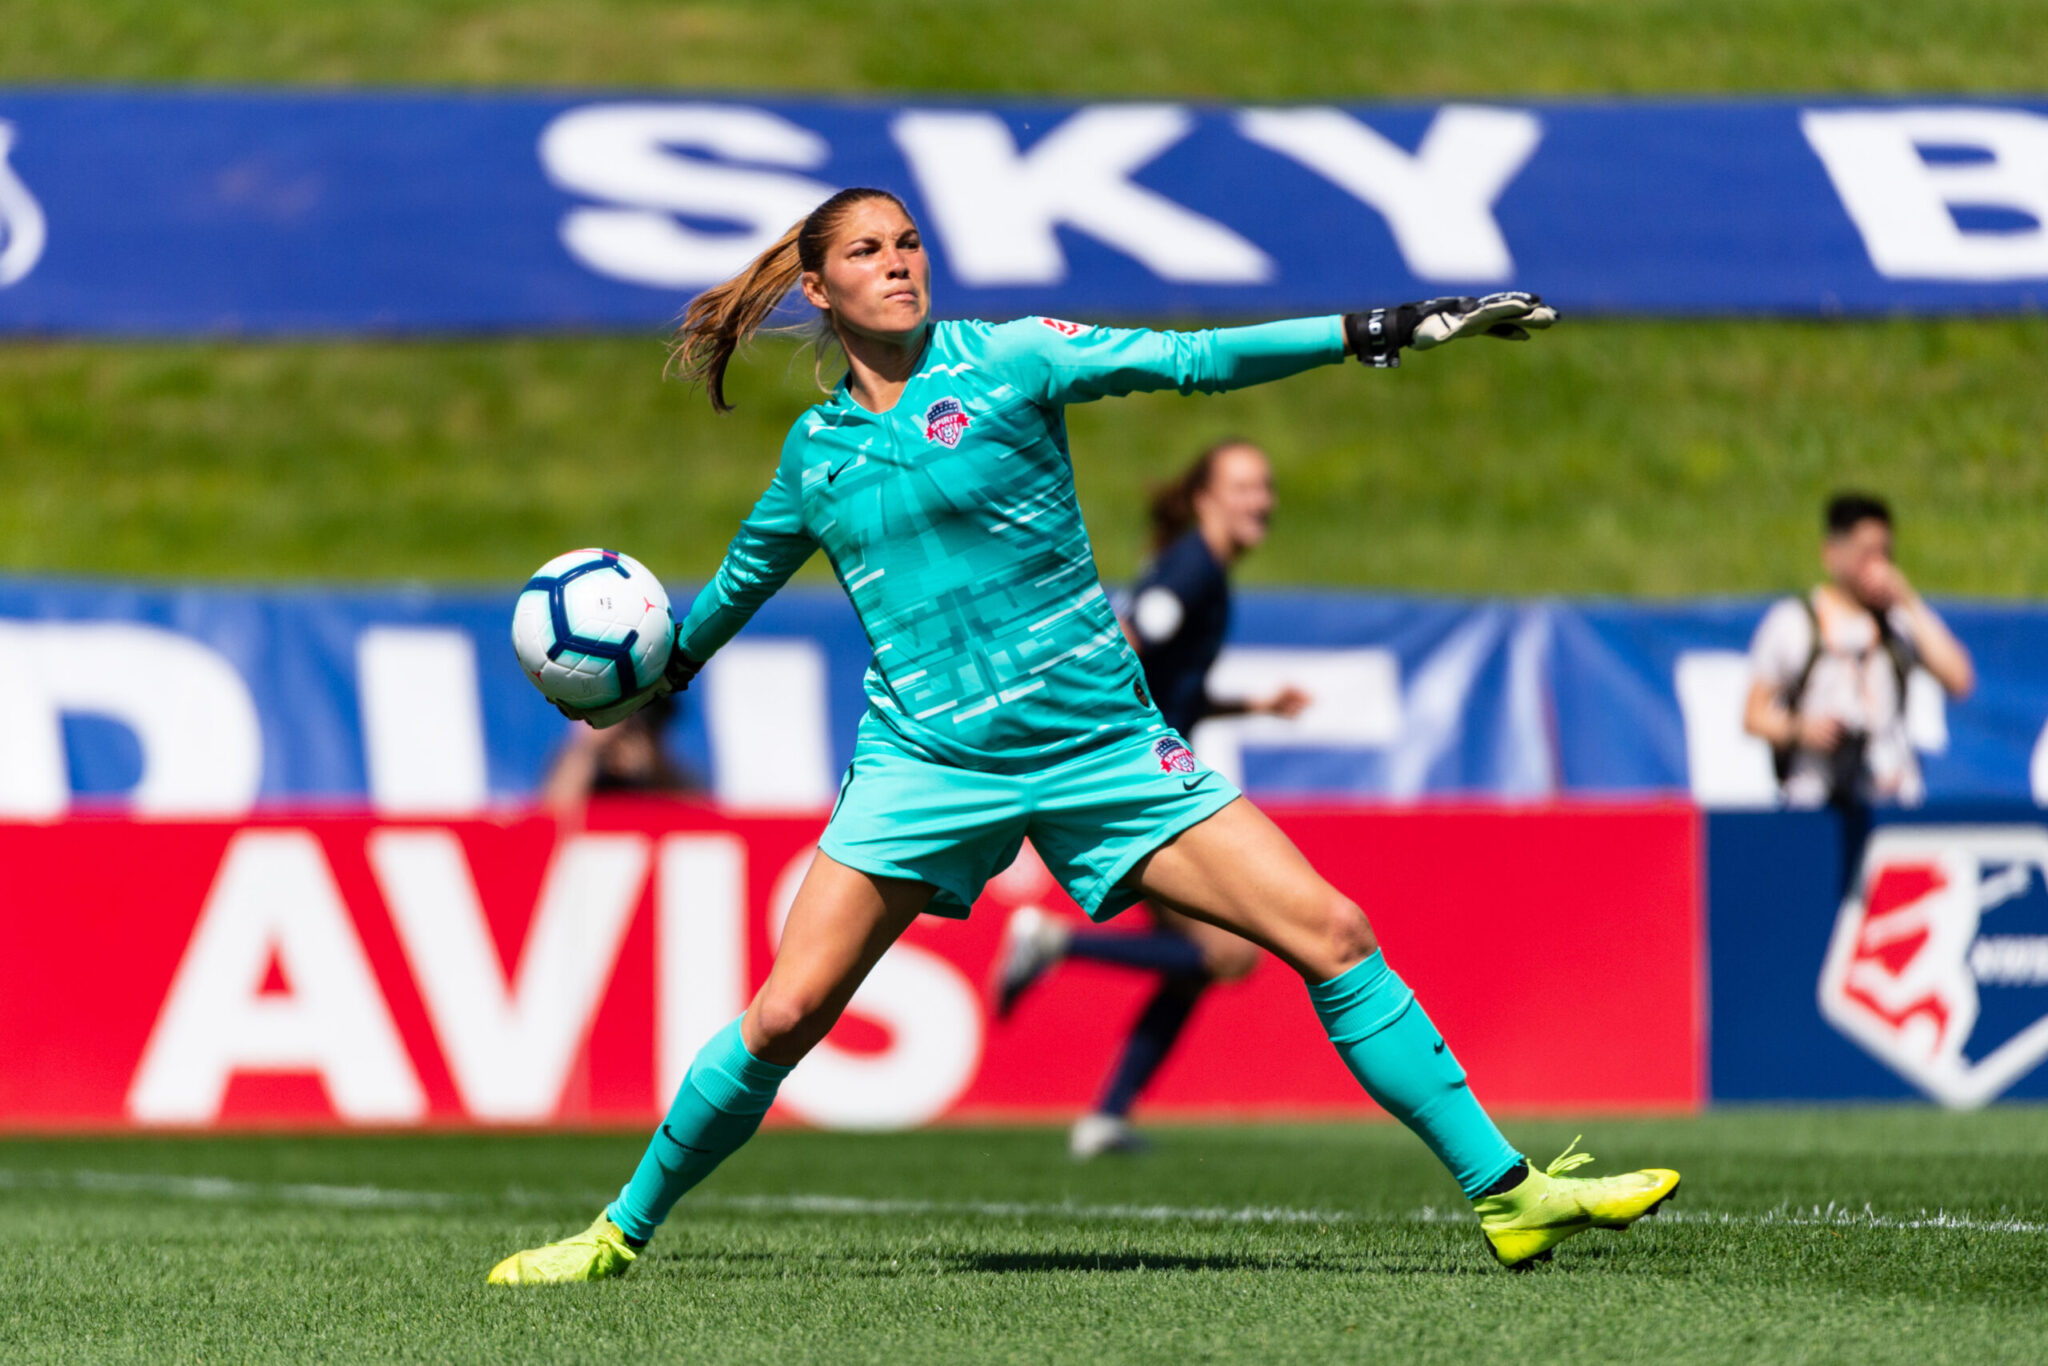 Aubrey Bledsoe wins W-League goalkeeper of the year Featured Image